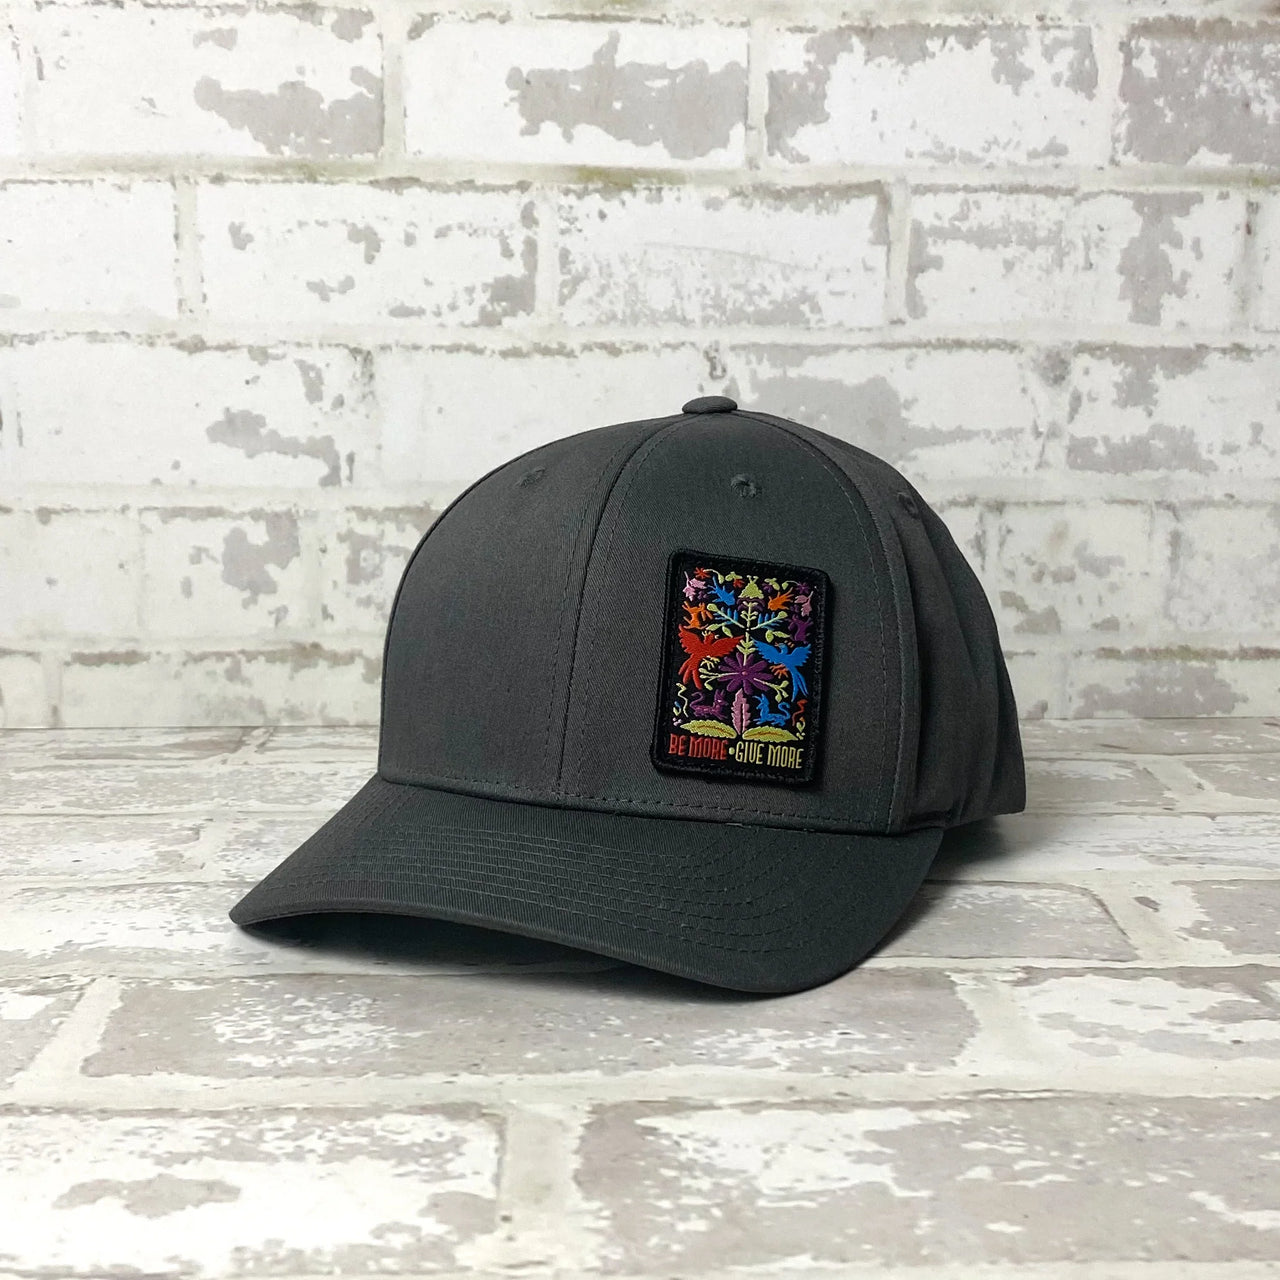 Lucky Chuck Snapback Patch Hat - Be More Give More